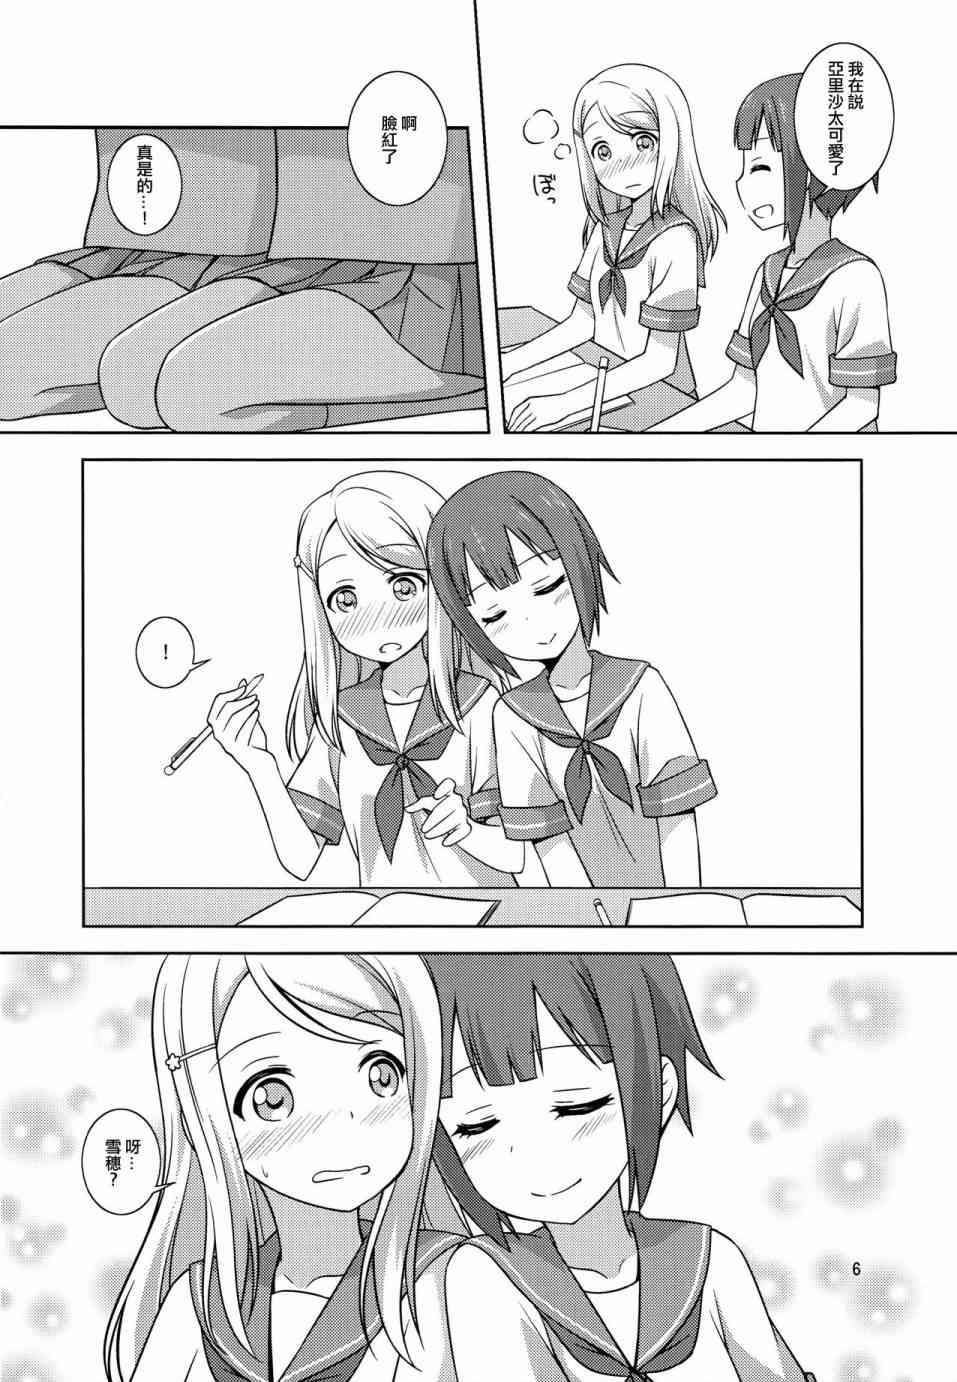 LoveLive - Y&A - 3